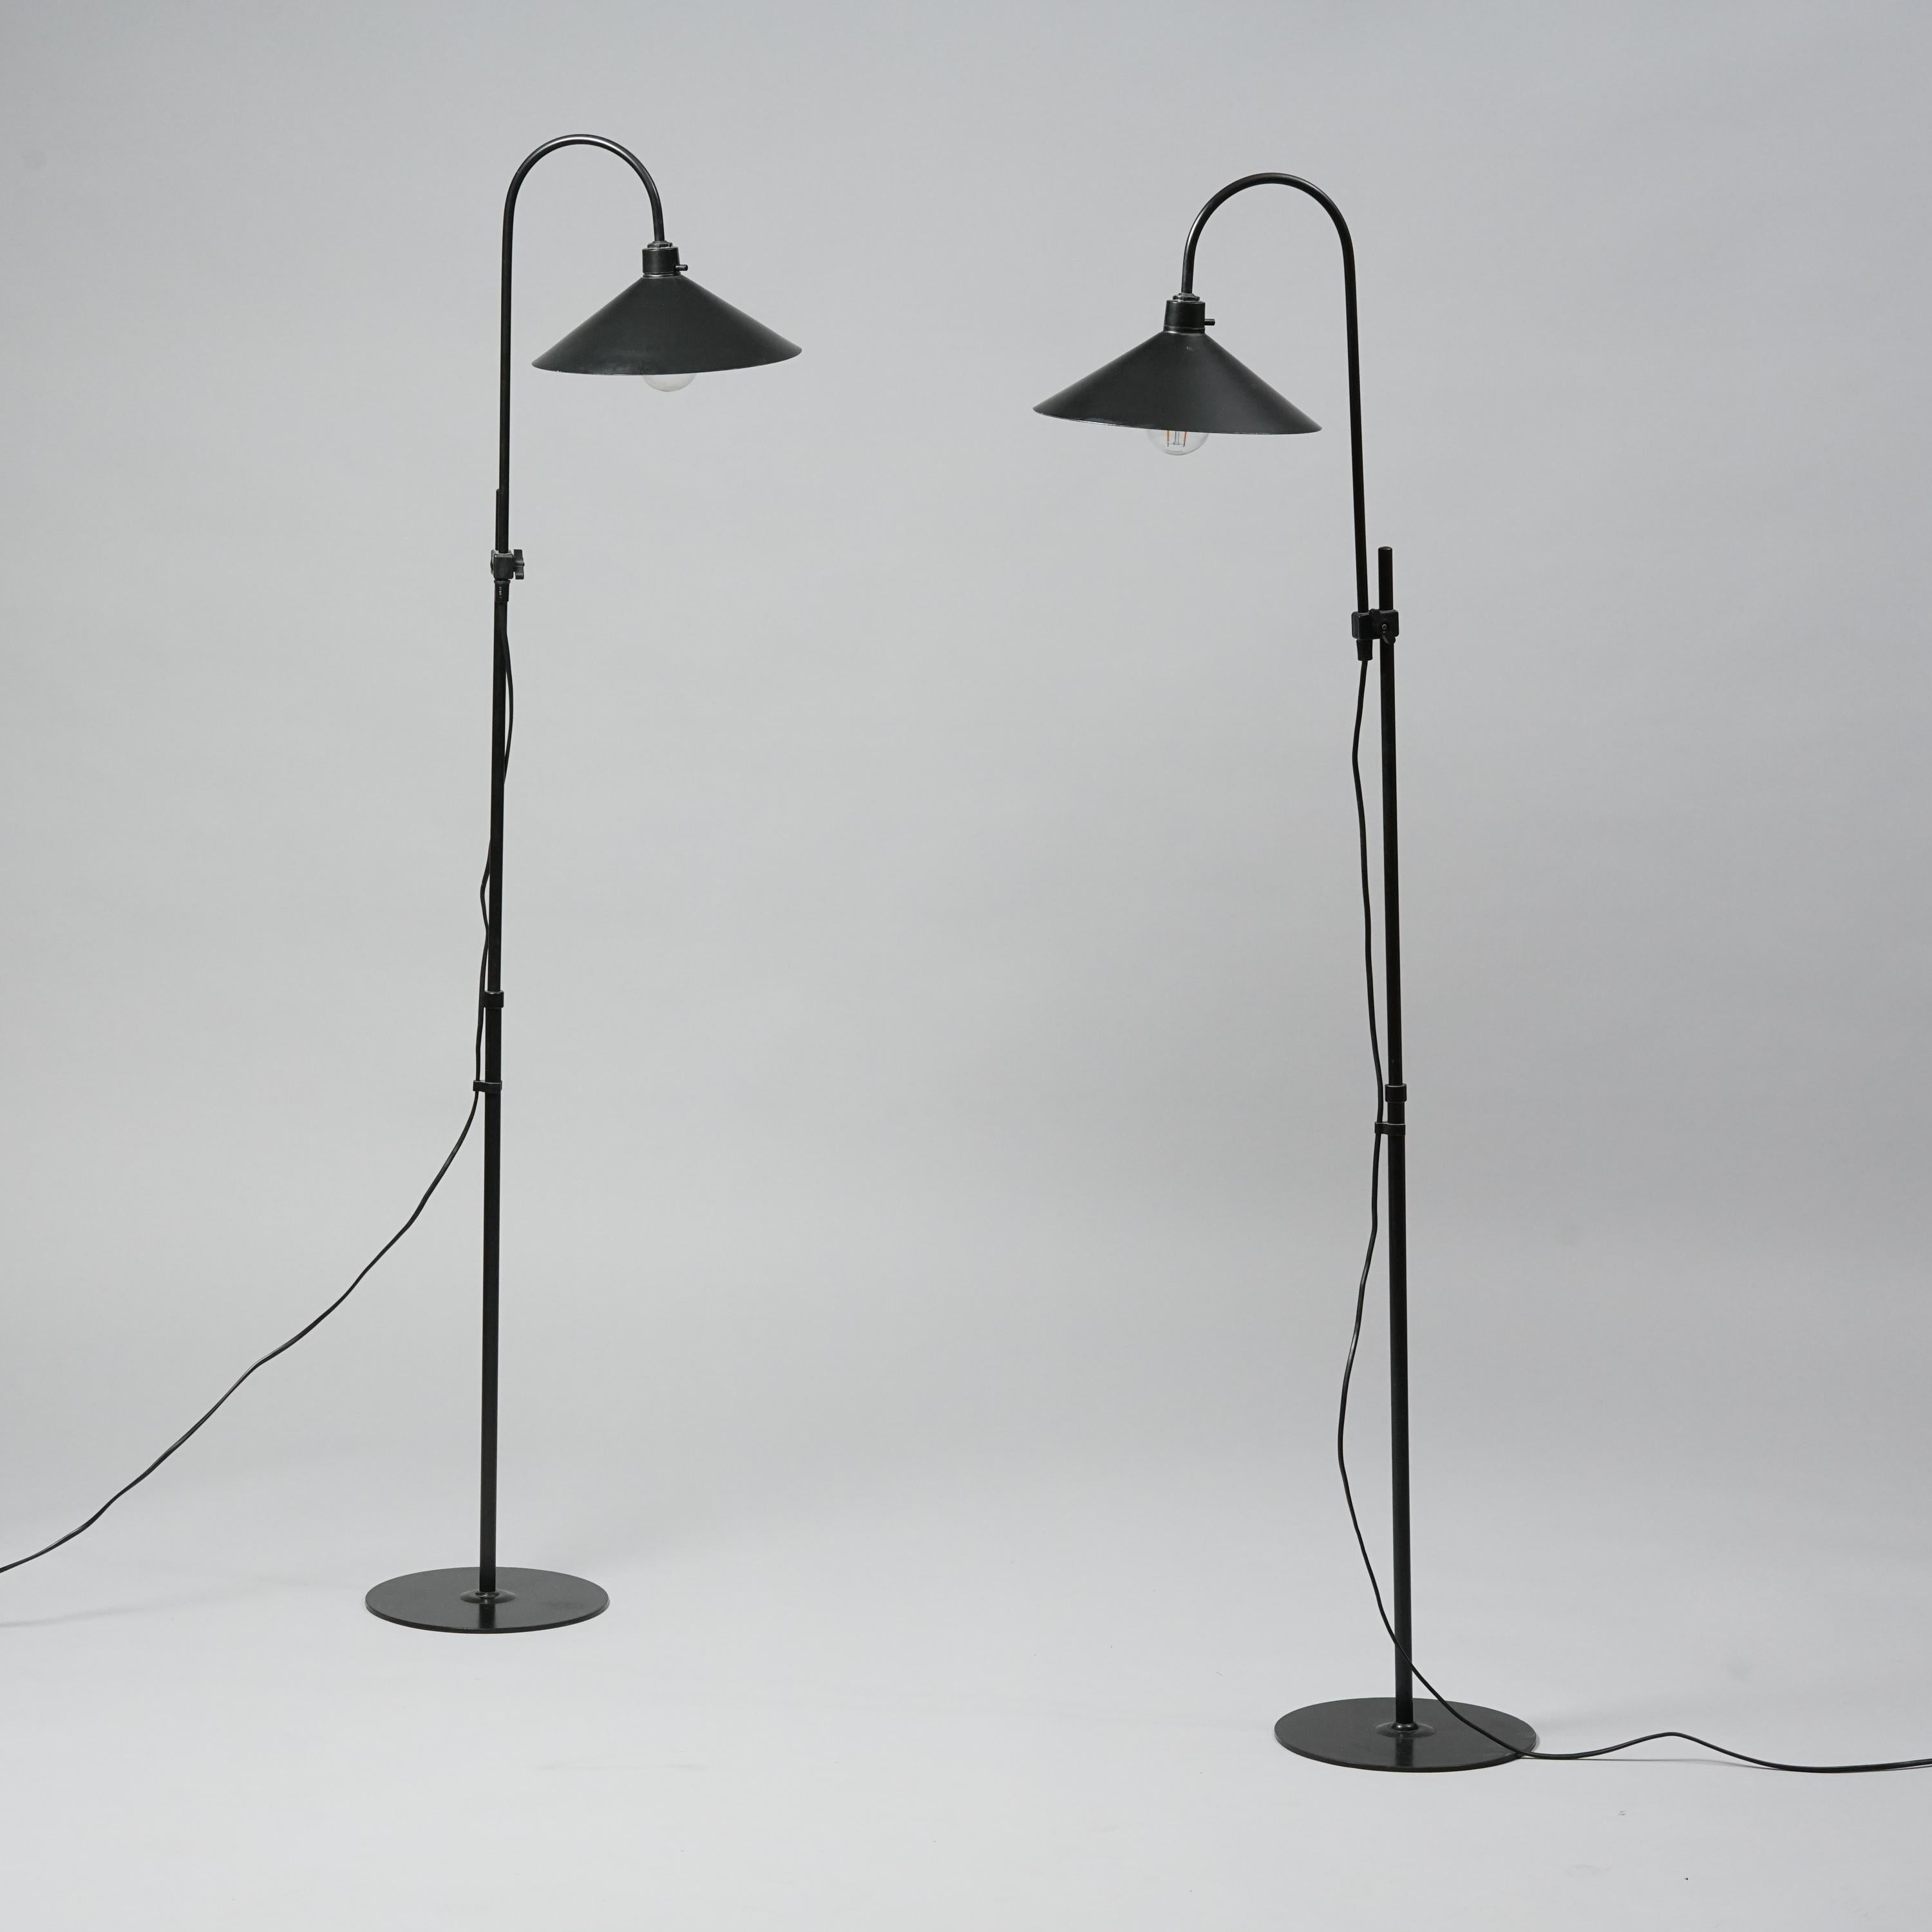 Set of two Danish floor lamps by Frandsen. Metal. Good vintage condition, minor wear consistent with age and use. The floor lamps are sold as a set. The height of the lamps is adjustable. The maximum height is 150 cm. Lampshade diameter is 26 cm.